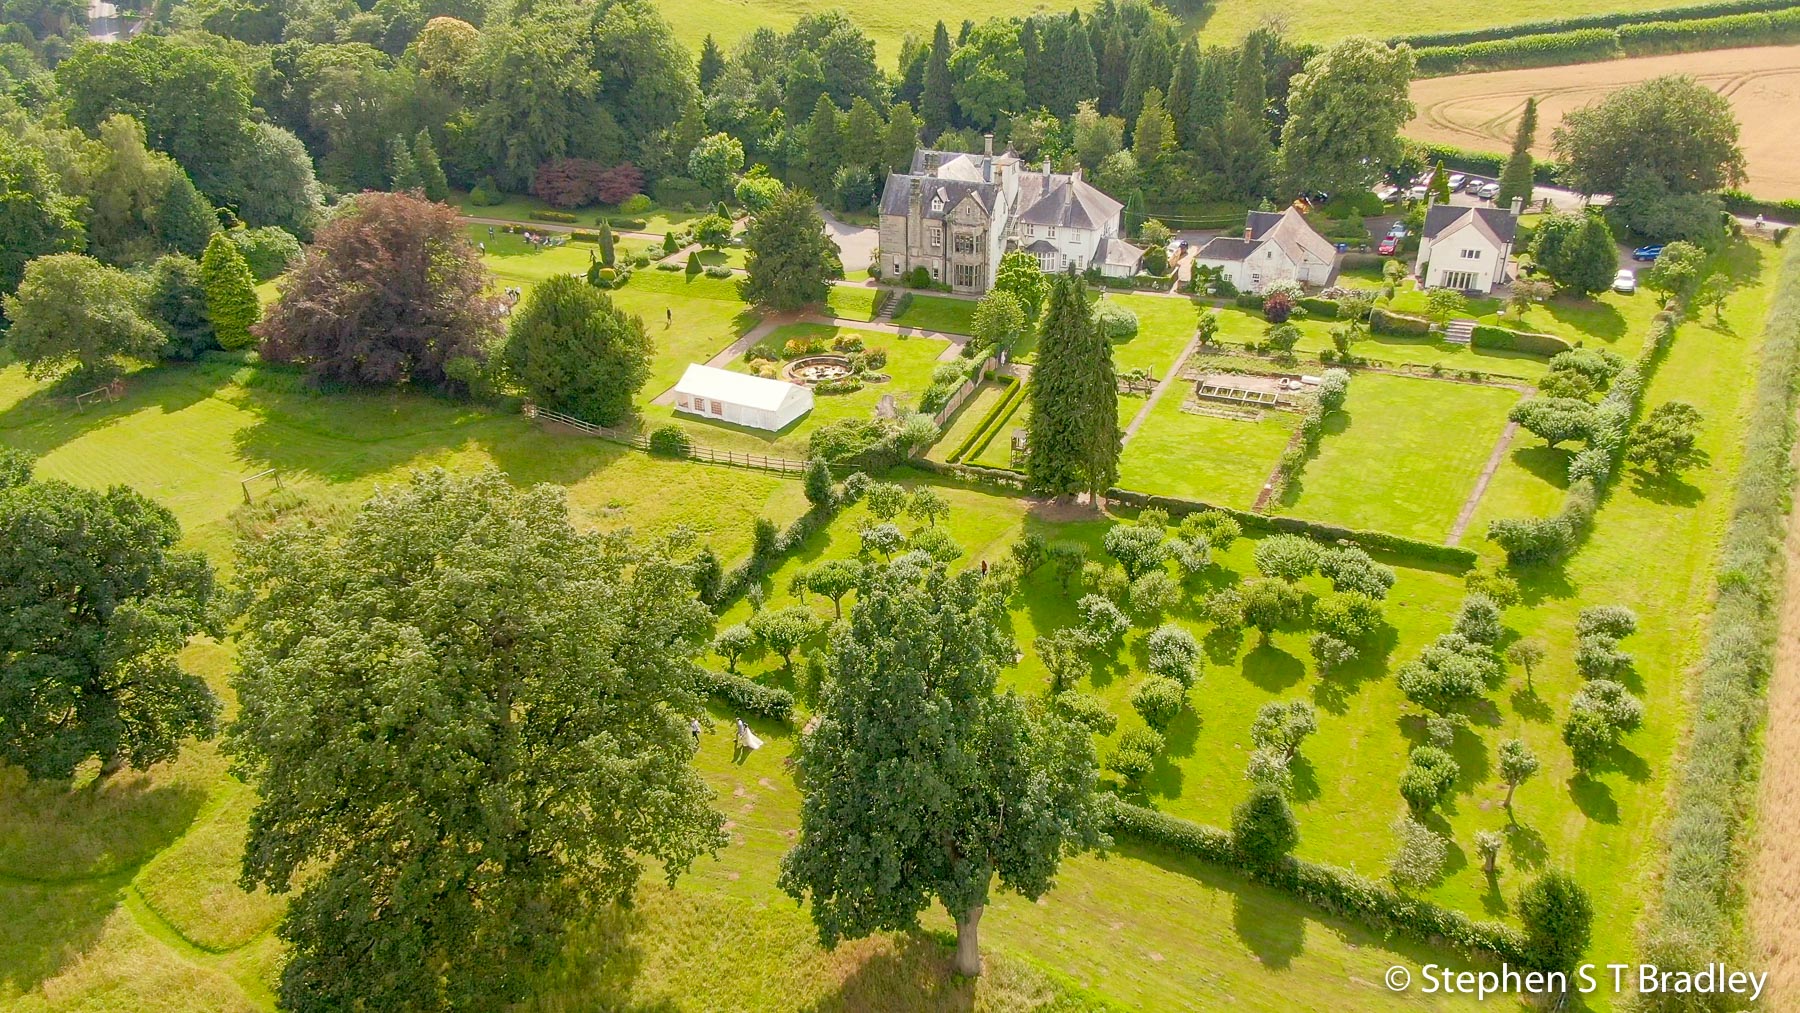 Aerial video of country house wedding at Birdsgrove, Derbyshire, UK, by Stephen S T Bradley - aerial drone photographer and video production services in Dublin and throughout Ireland. Screenshot reference 10